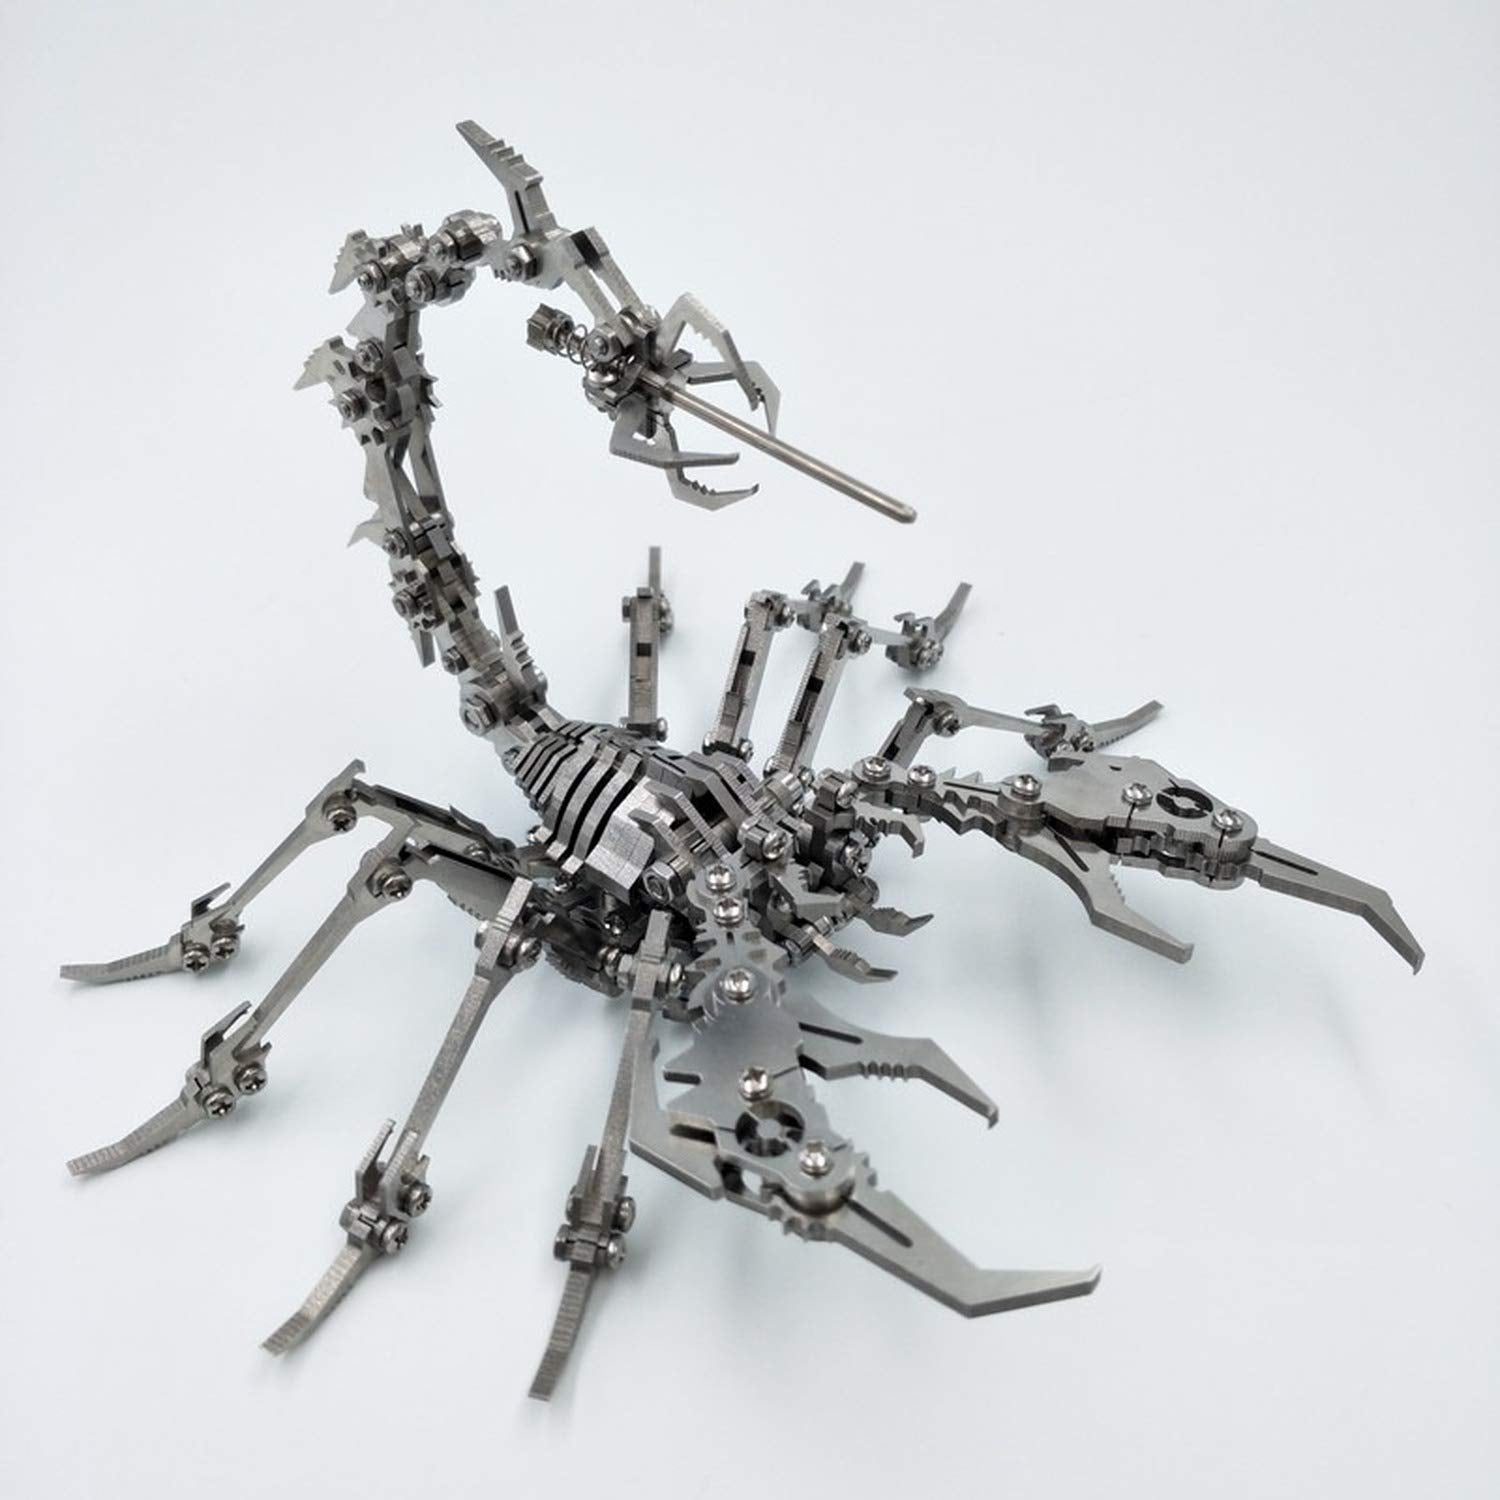 A metal scorpion made from a DIY metal scorpion building kit on a grey background